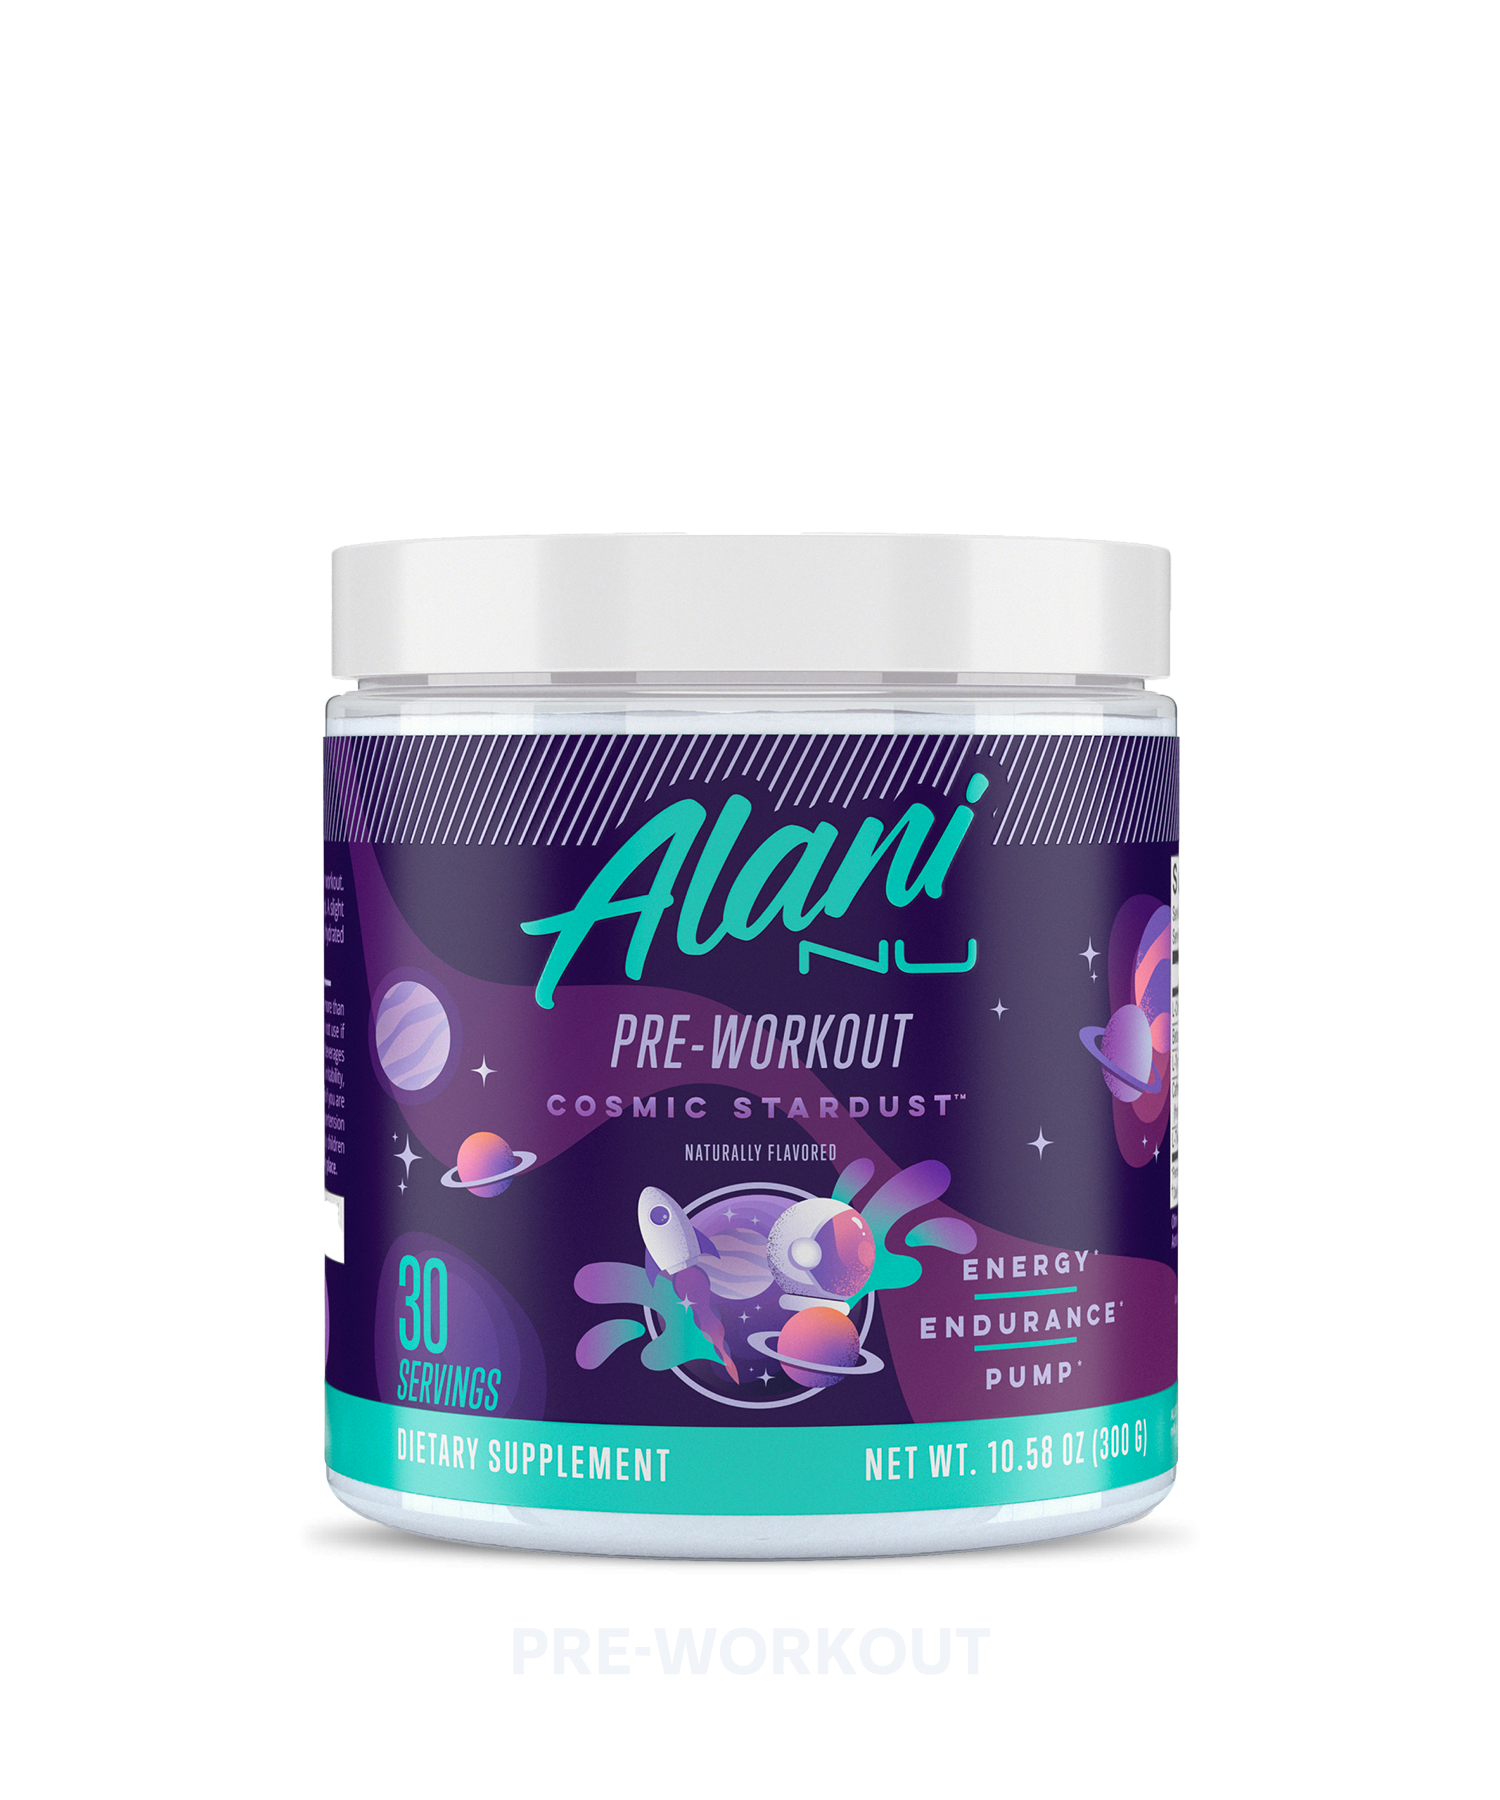 A 30 serving container of Pre-workout in flavor cosmic stardust. 